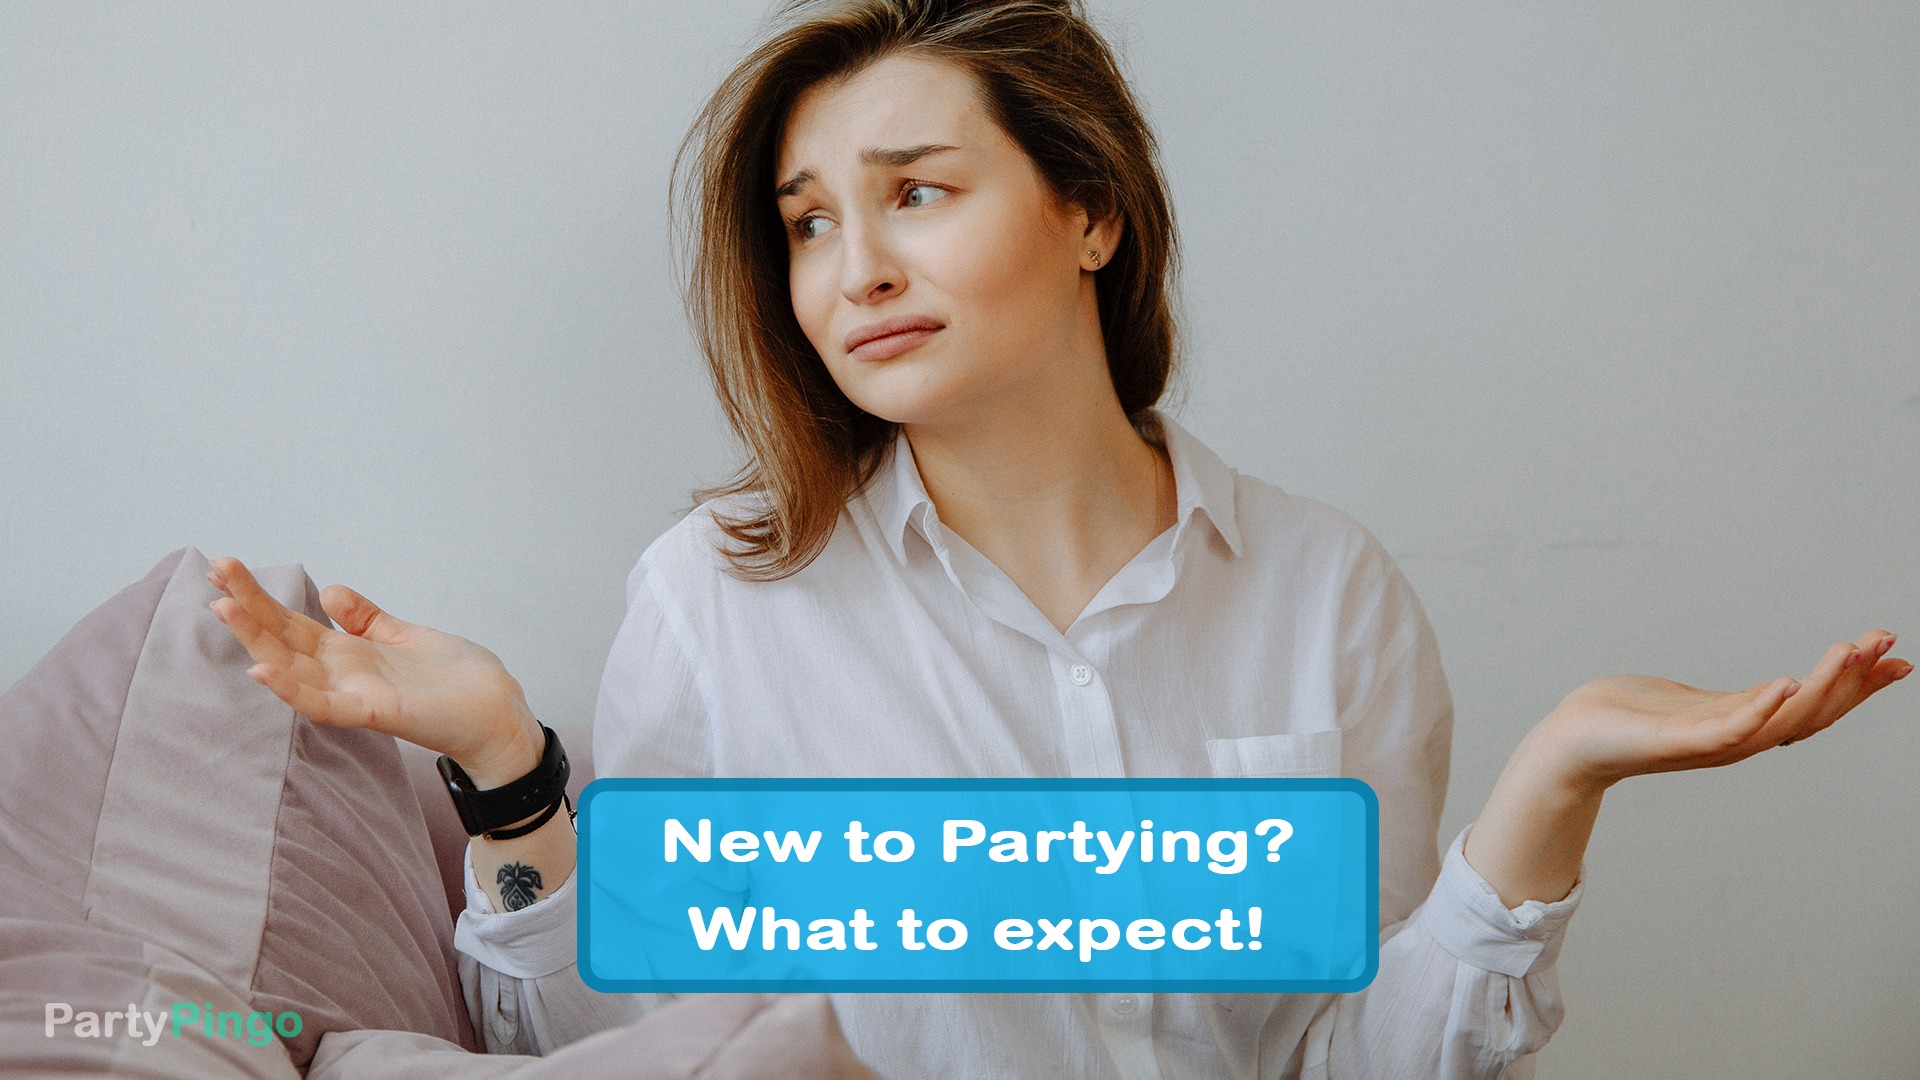 New to Partying and What to Expect